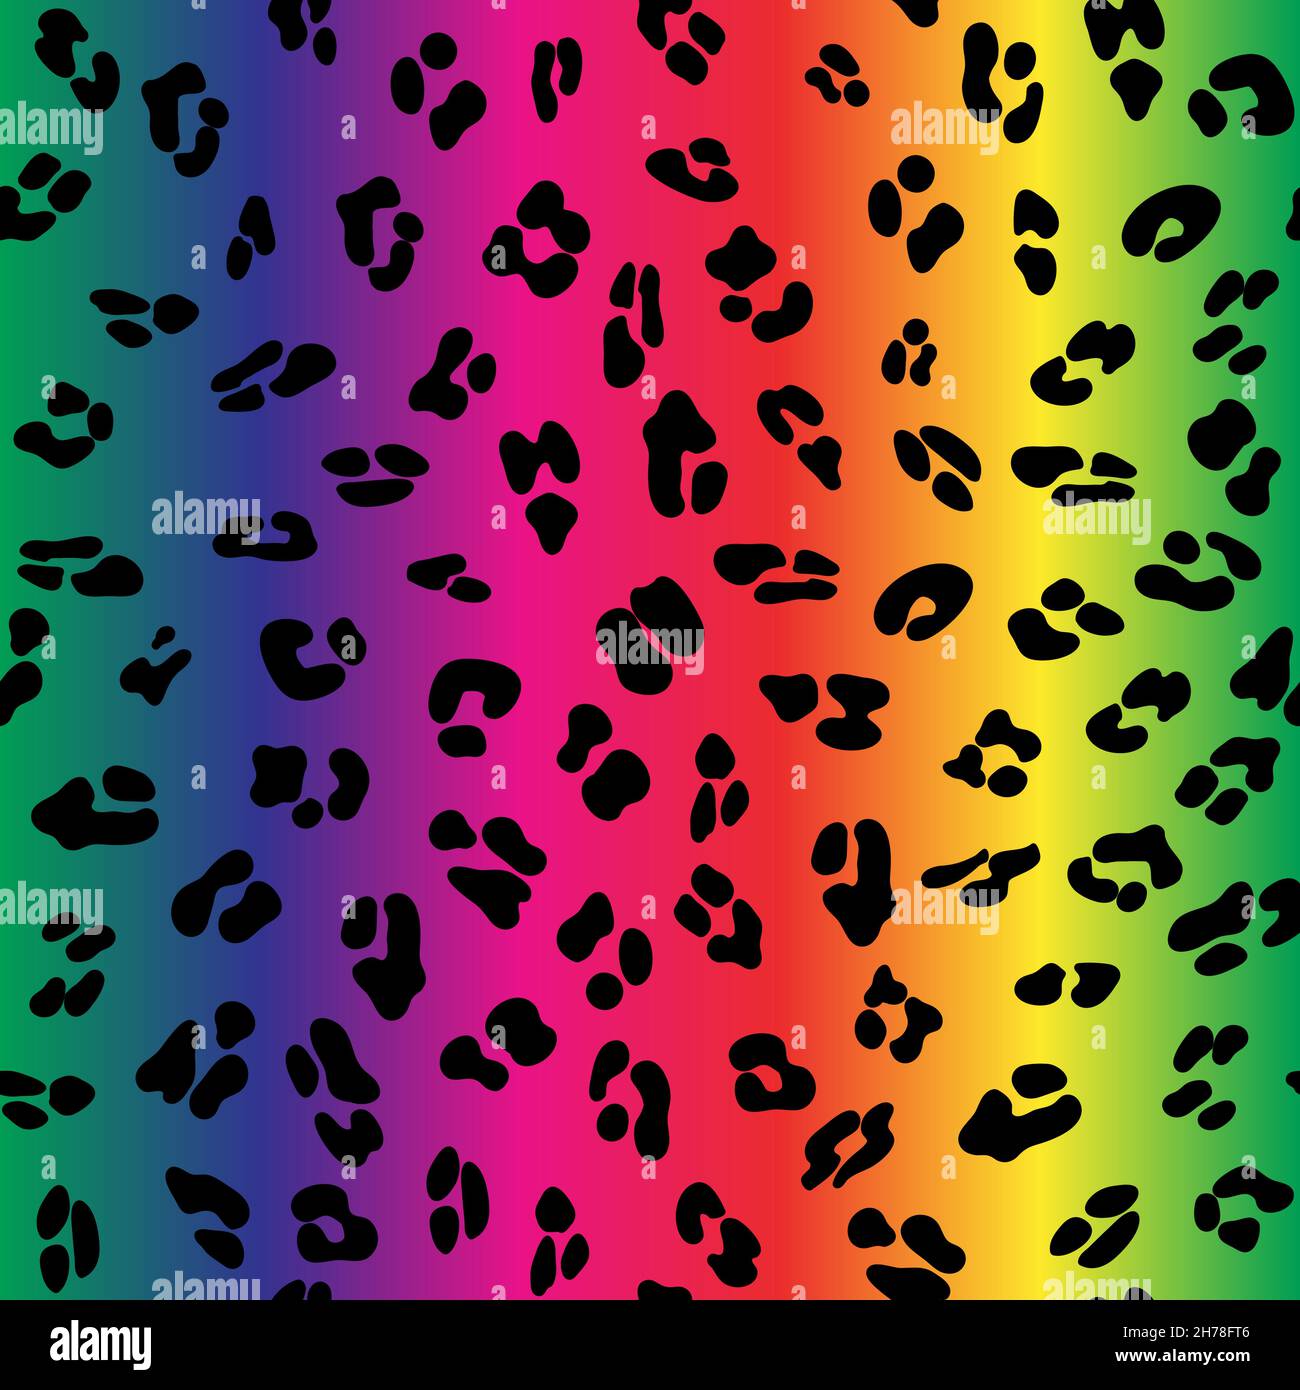 https://c8.alamy.com/comp/2H78FT6/leopard-seamless-rainbow-pattern-leopard-pattern-design-in-rainbow-colors-seamless-ocelot-pattern-for-wallpaper-wrapping-pape-textile-2H78FT6.jpg